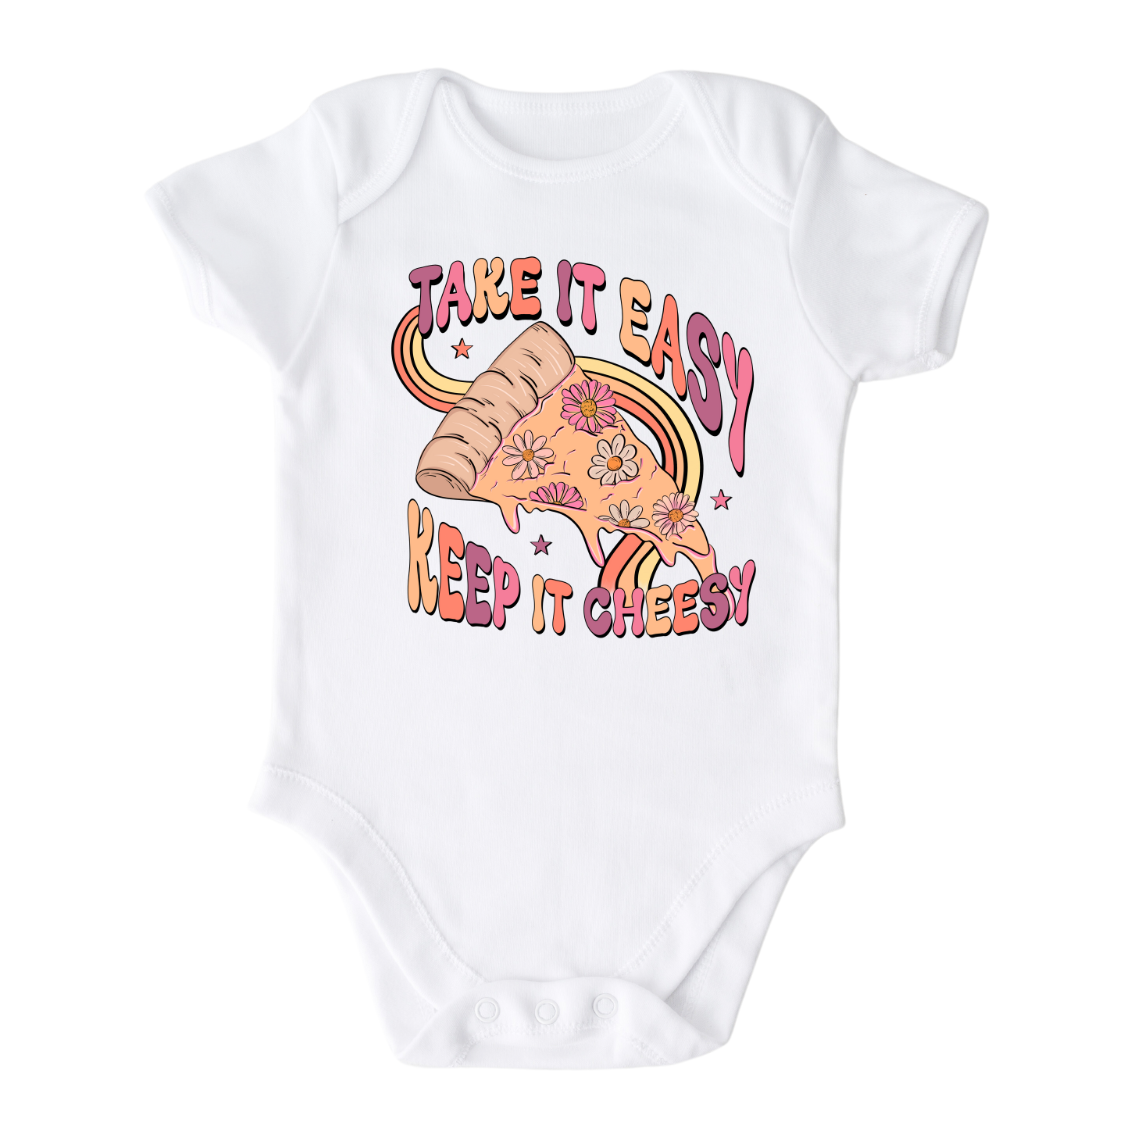 Cute Baby Onesie - Girl Outfit - Gift for Baby Girl with a cute retro pizza design and 'Take It Easy Keep It Cheesy' text.